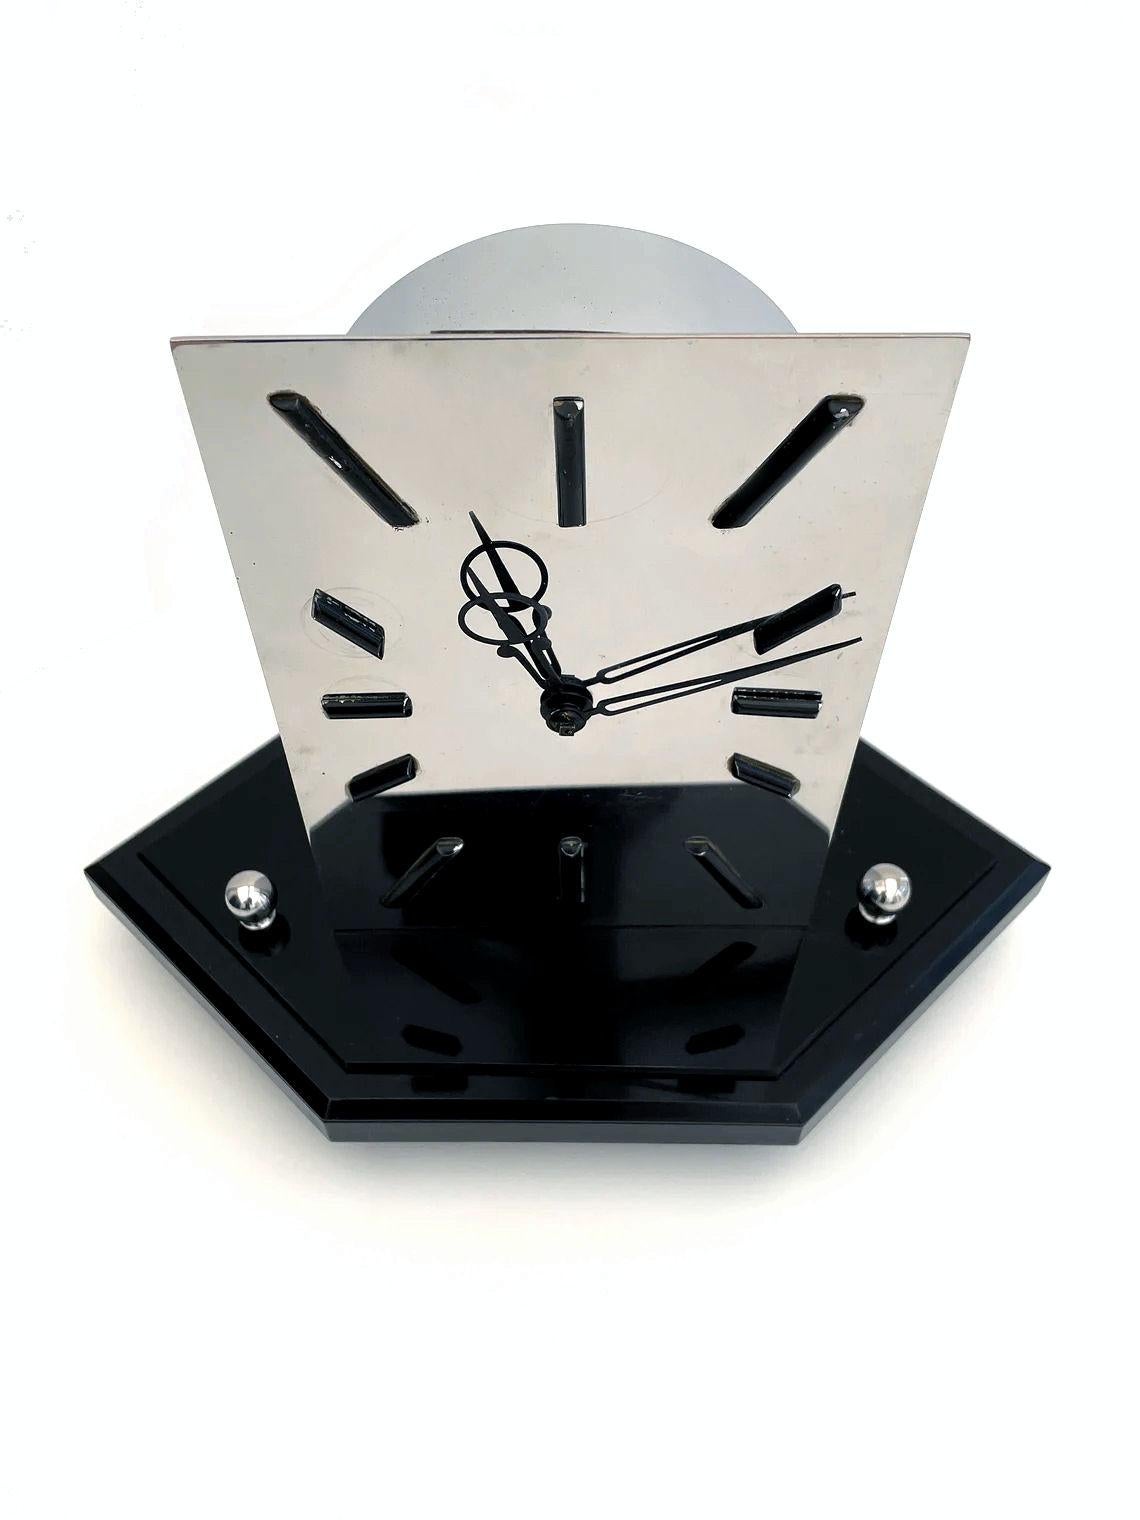 Art Deco Modernist 8 Day Chrome Mantle Clock by Smiths, English, c1936 3